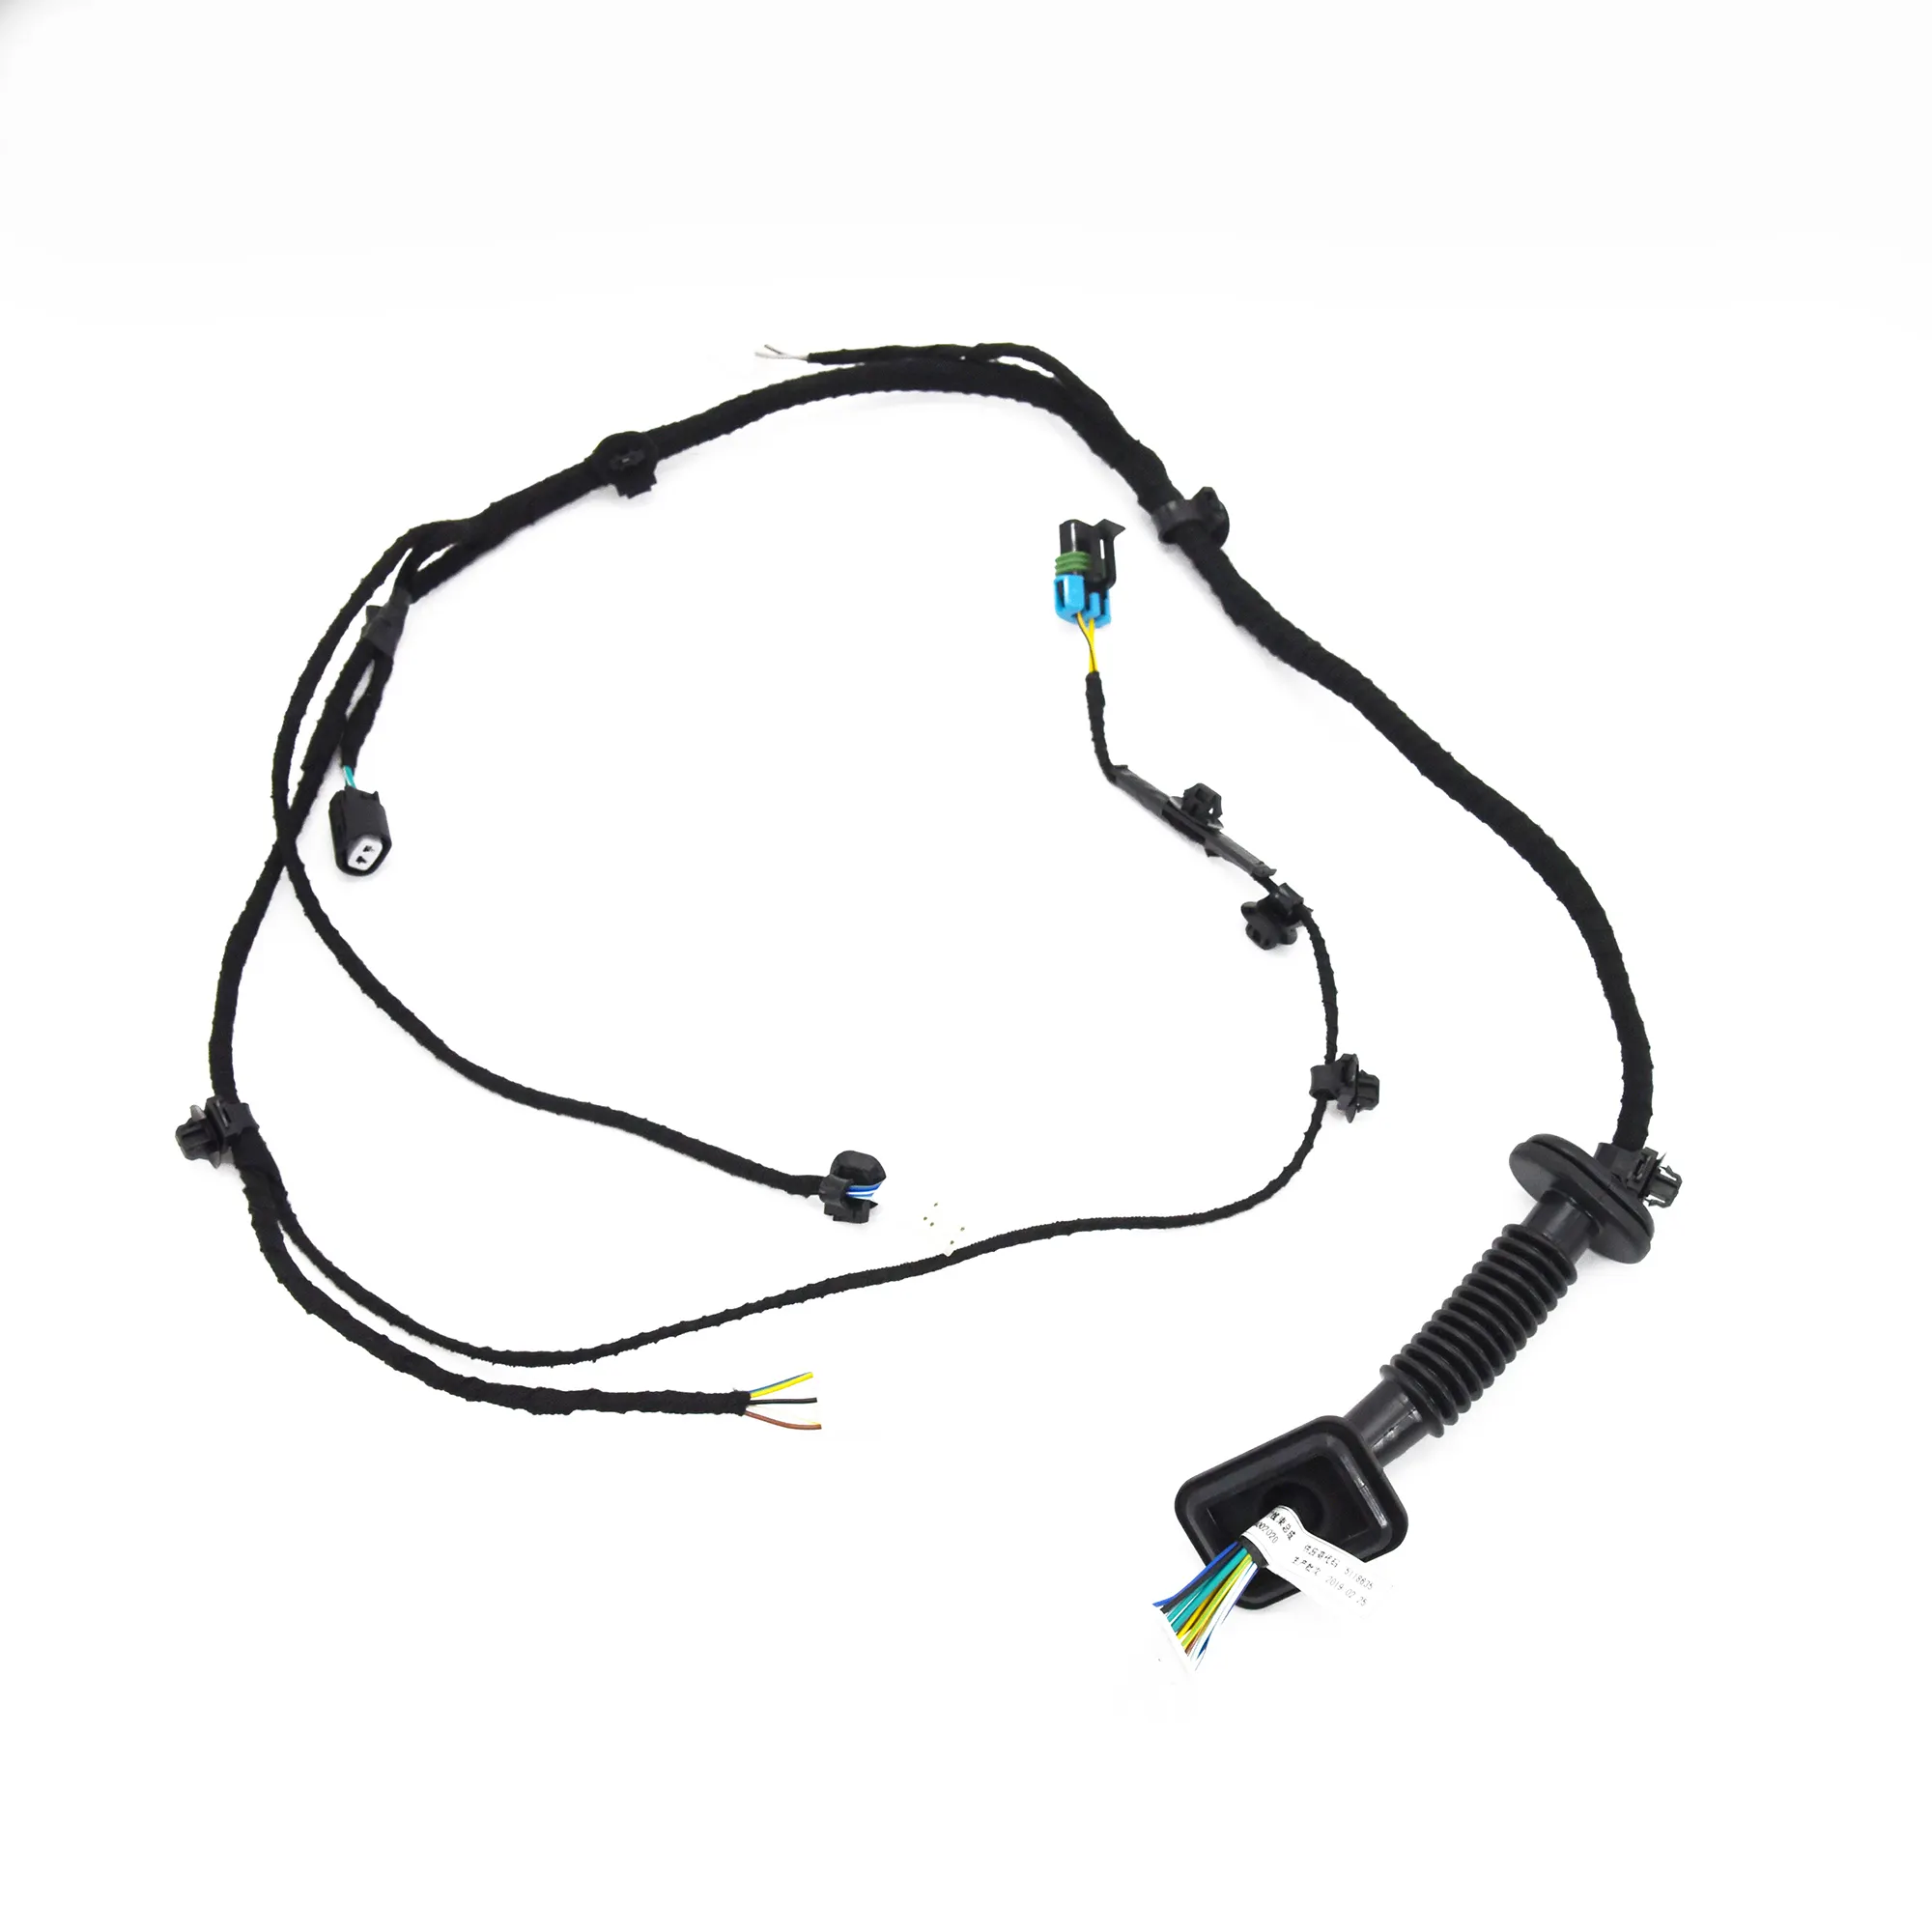 Customized automotive electric motorcycle wiring harness complete wiring harness assembly new energy wiring harness